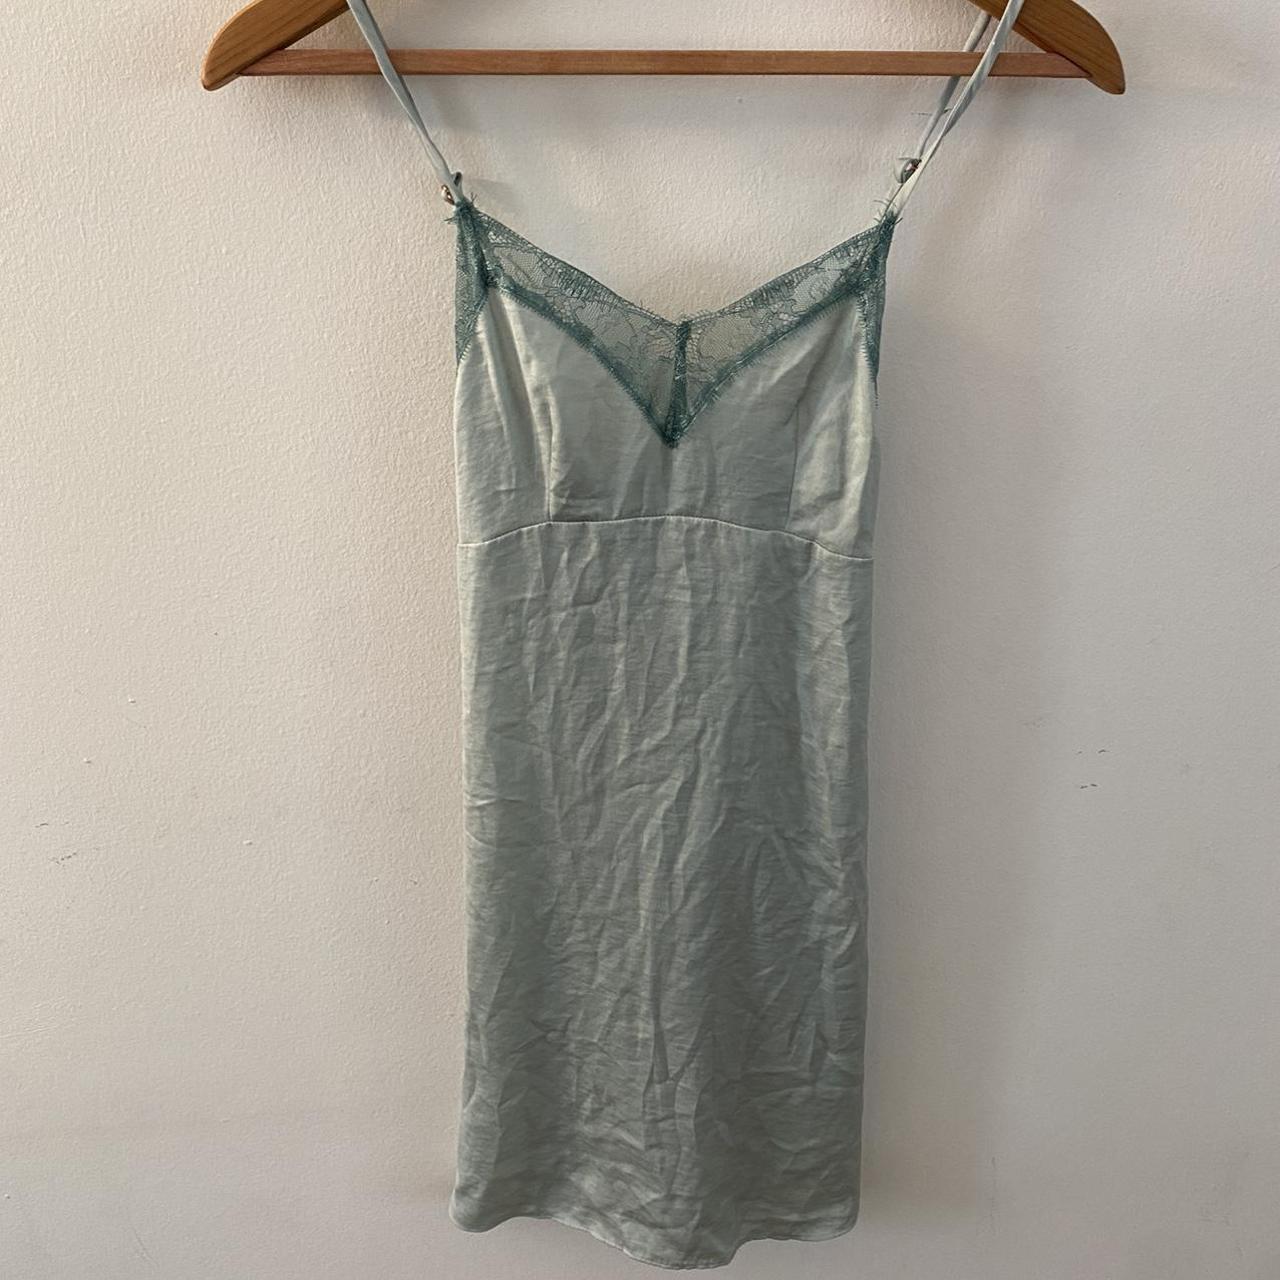 Product Image 1 - Light blue/green slip dress with